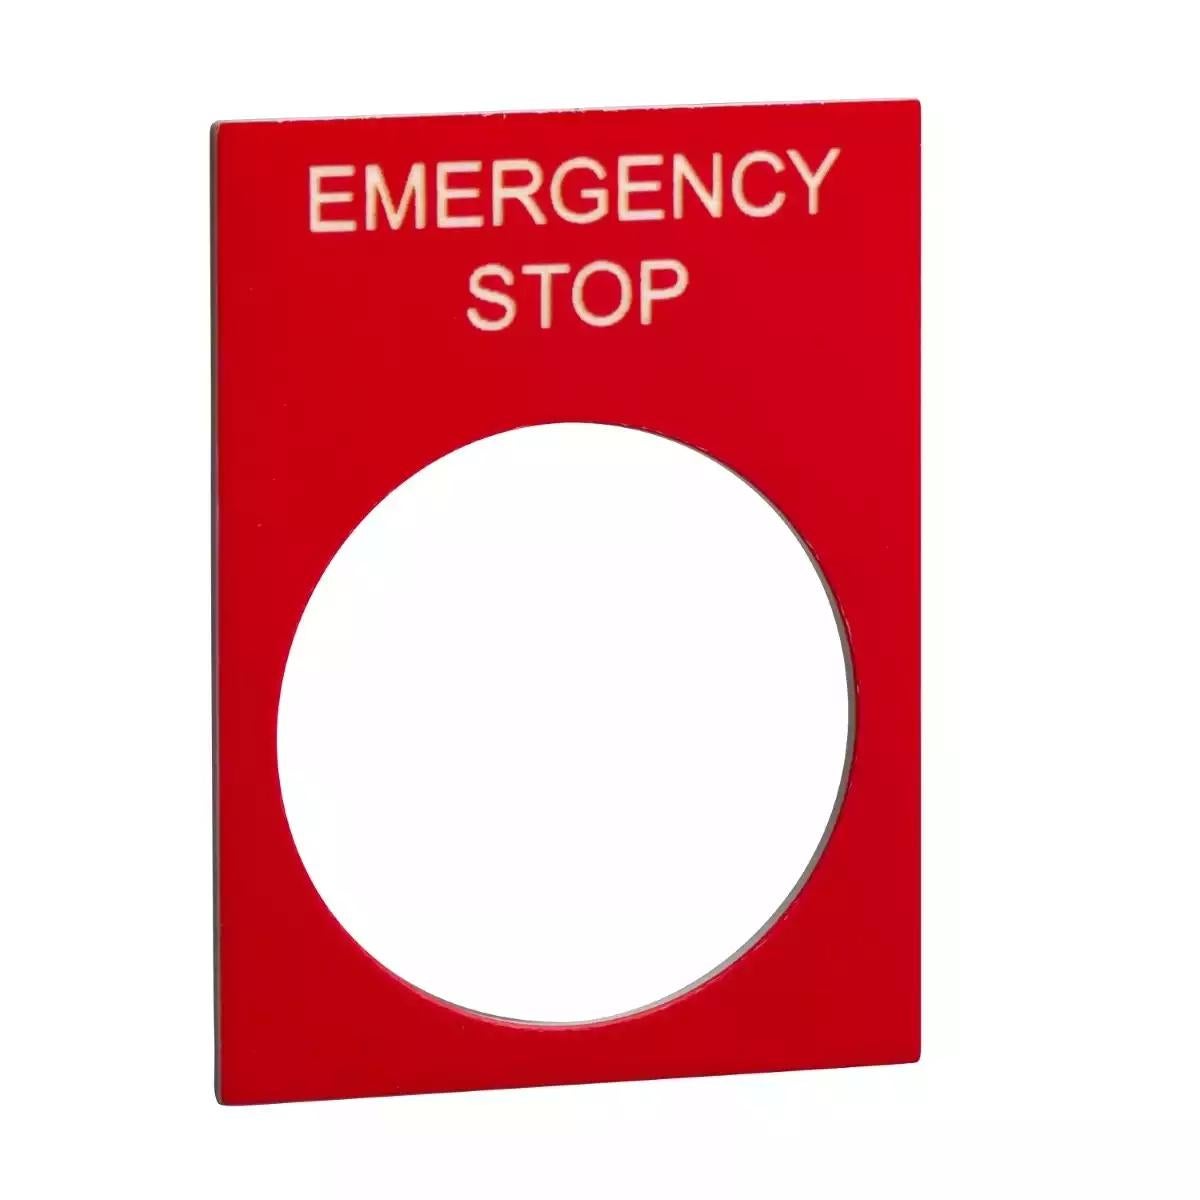 Harmony XAC, Marked Legend, Nameplate, 30 x 40mm, Plastic, Red, 22mm Push Button, White Marked EMERGENCY STOP